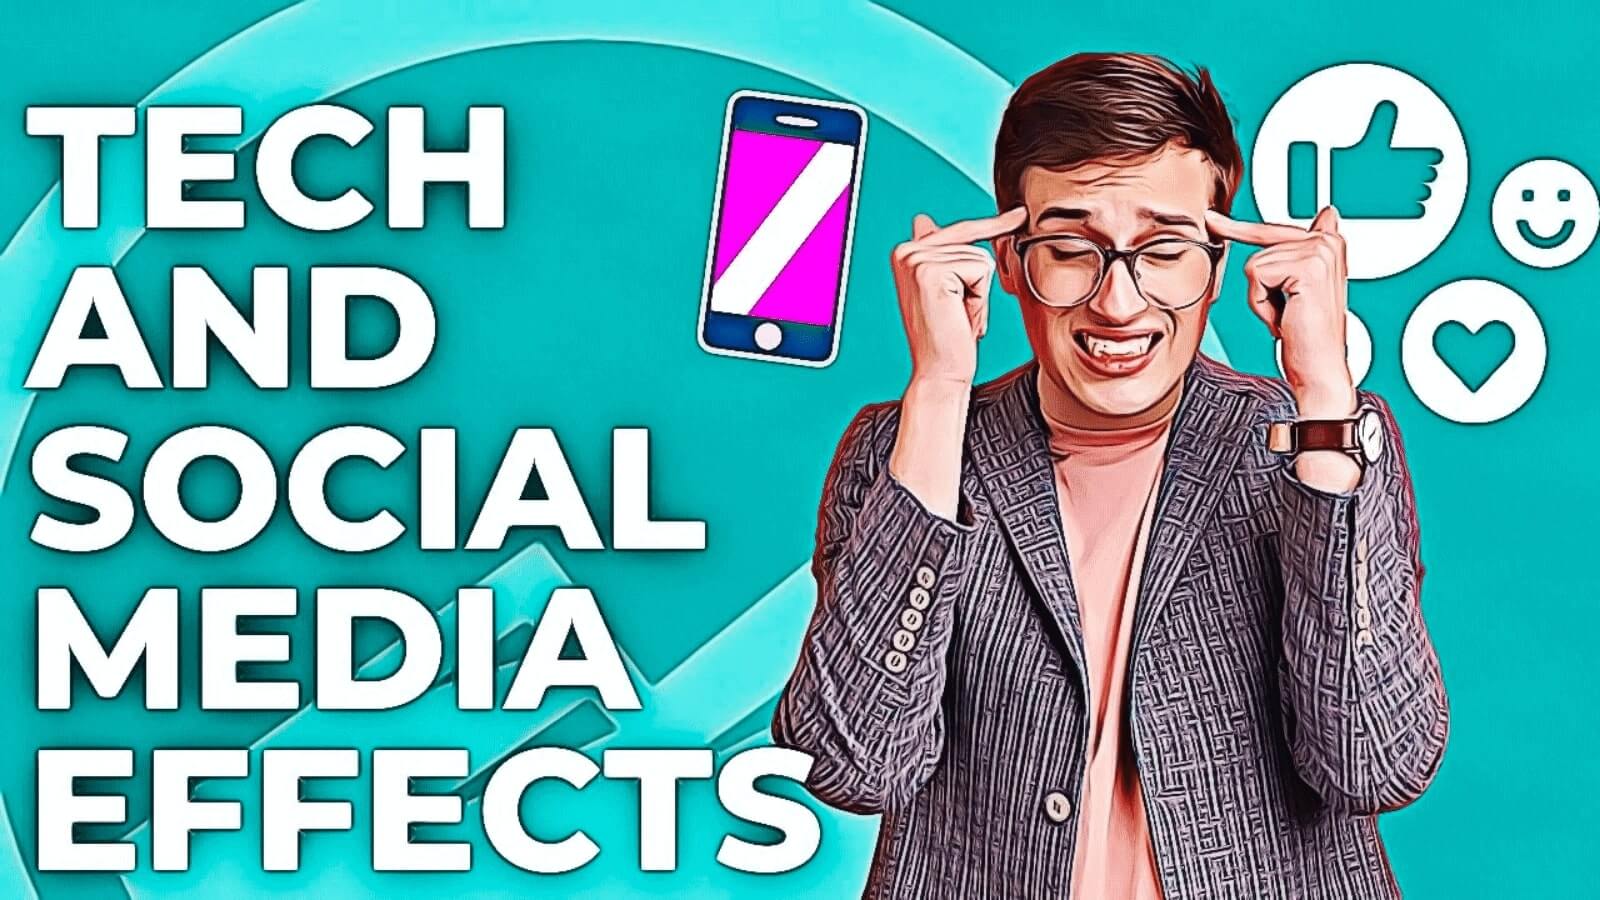 Tech and social media effects